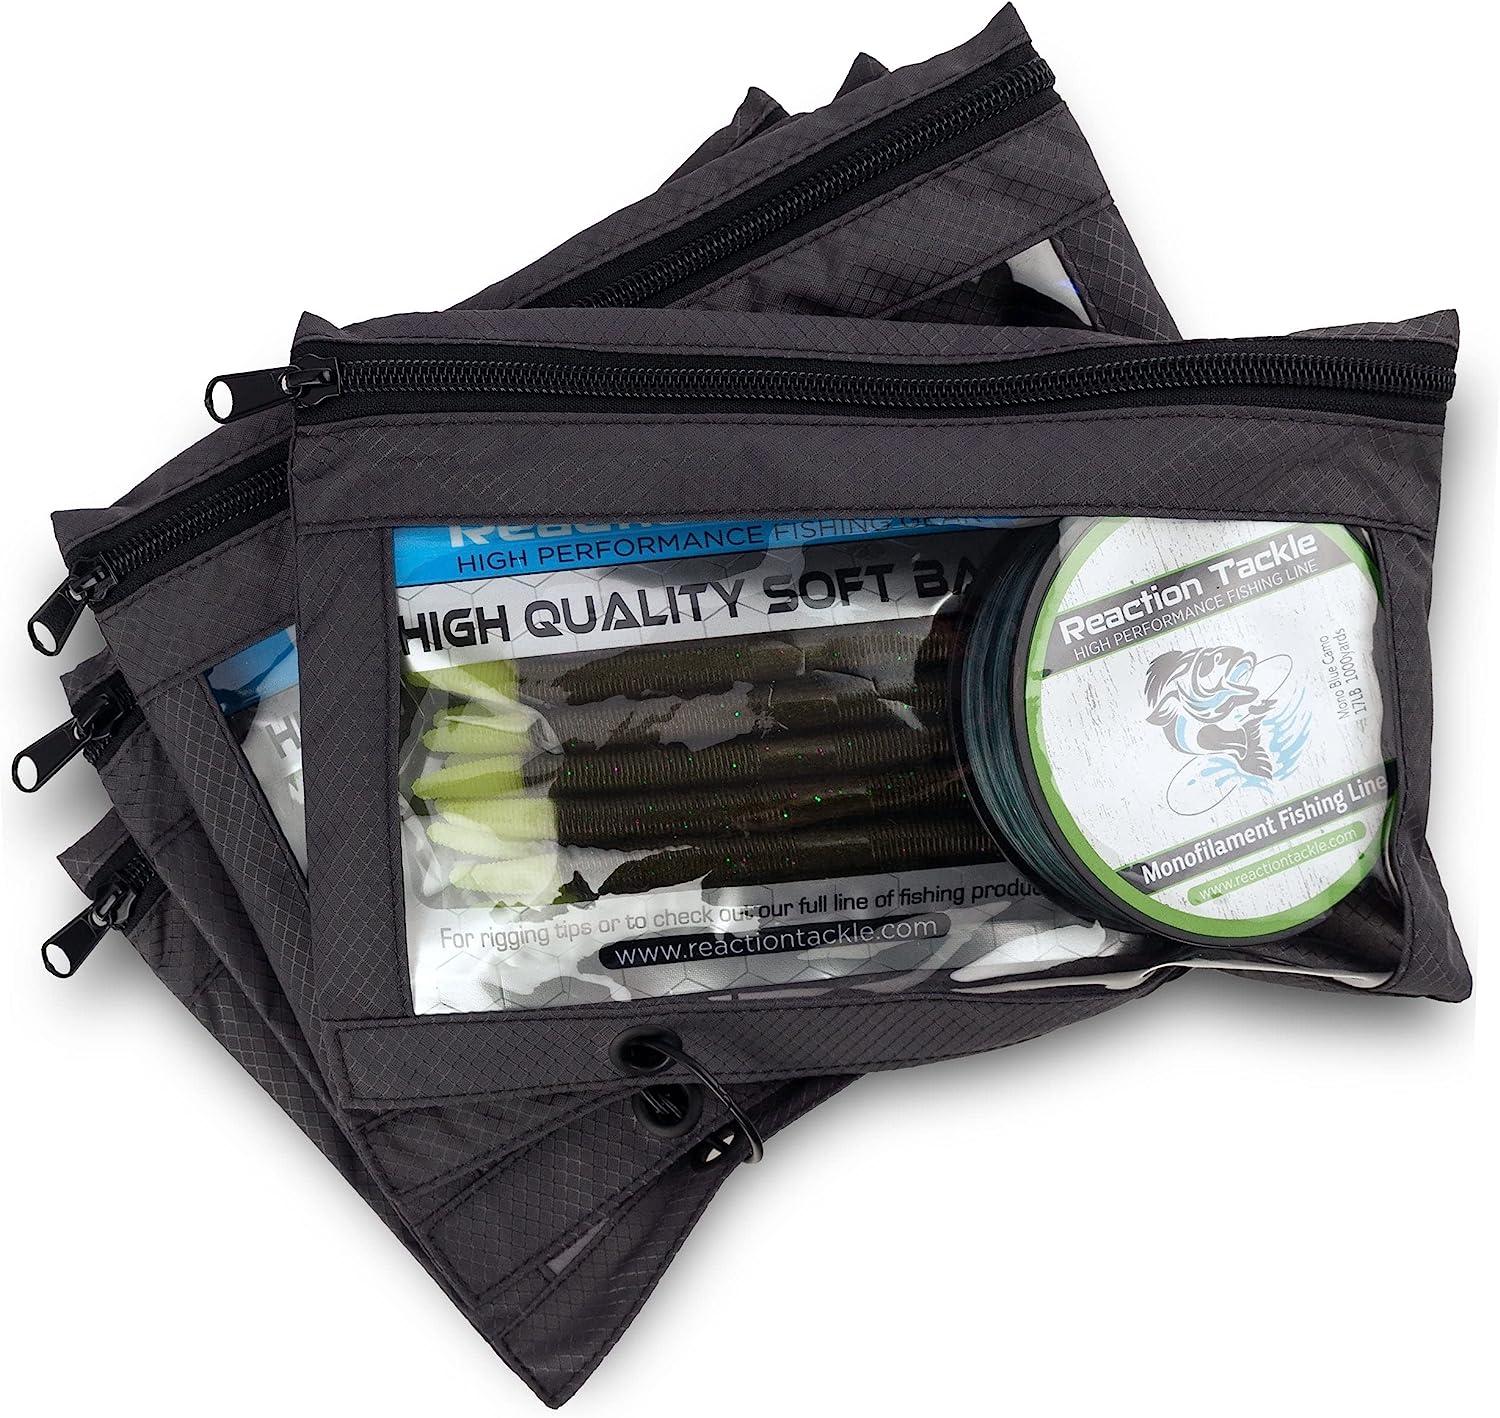 Reaction Tackle Deluxe Bait Binder - Salt Water Resistant Fishing Tackle  Binder with 4 Single Pocket Sleeves and 2 Double Pocket Sleeves, Heavy Duty Soft  Plastic Bait Storage Lines, Hooks, Sinkers b.